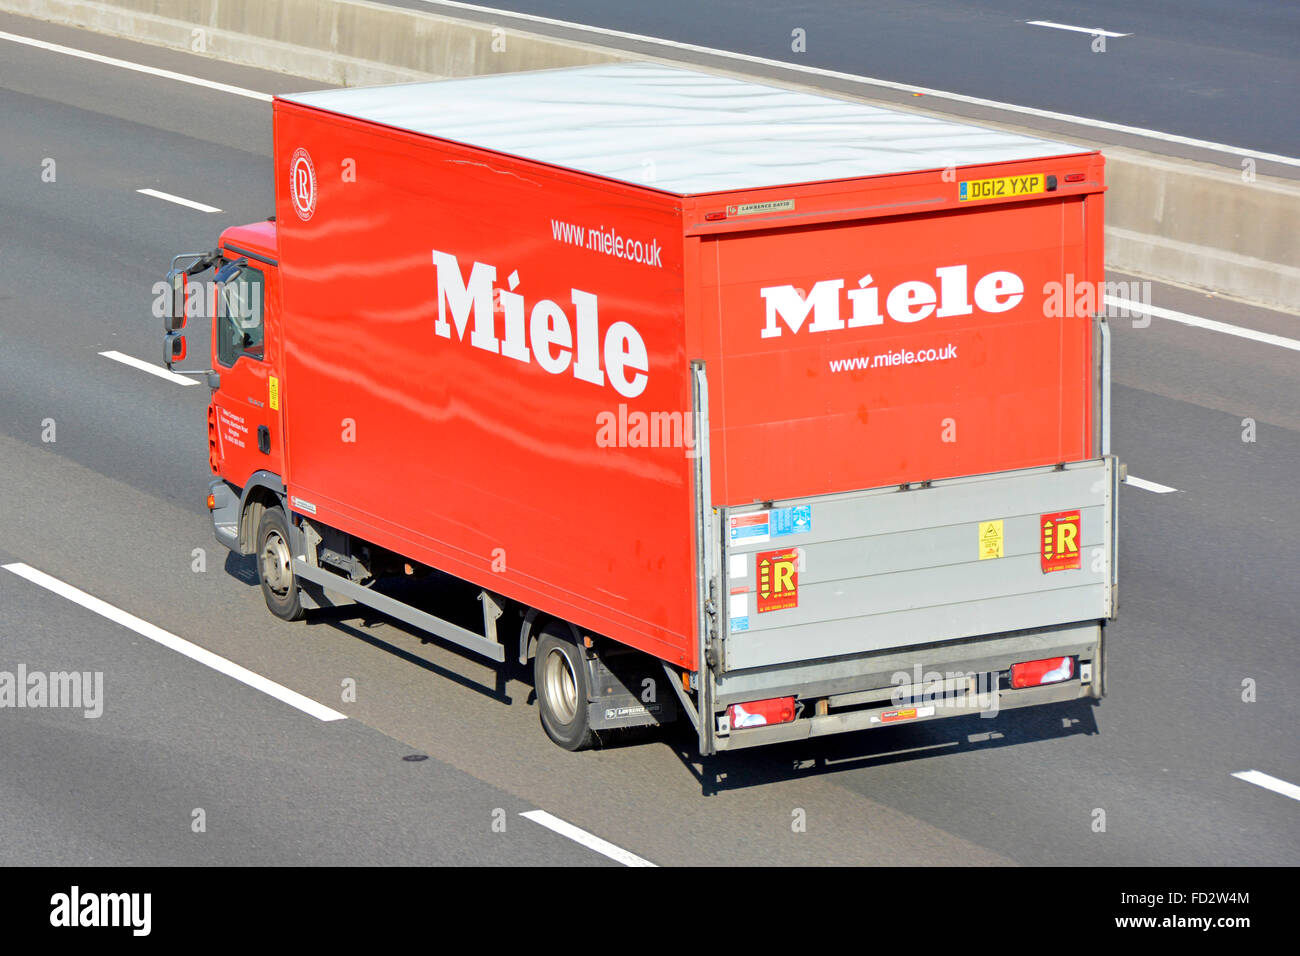 Side & back view German business & manufacturer of domestic appliances Miele  lorry truck with tailgate platform hoist driving on motorway England UK  Stock Photo - Alamy